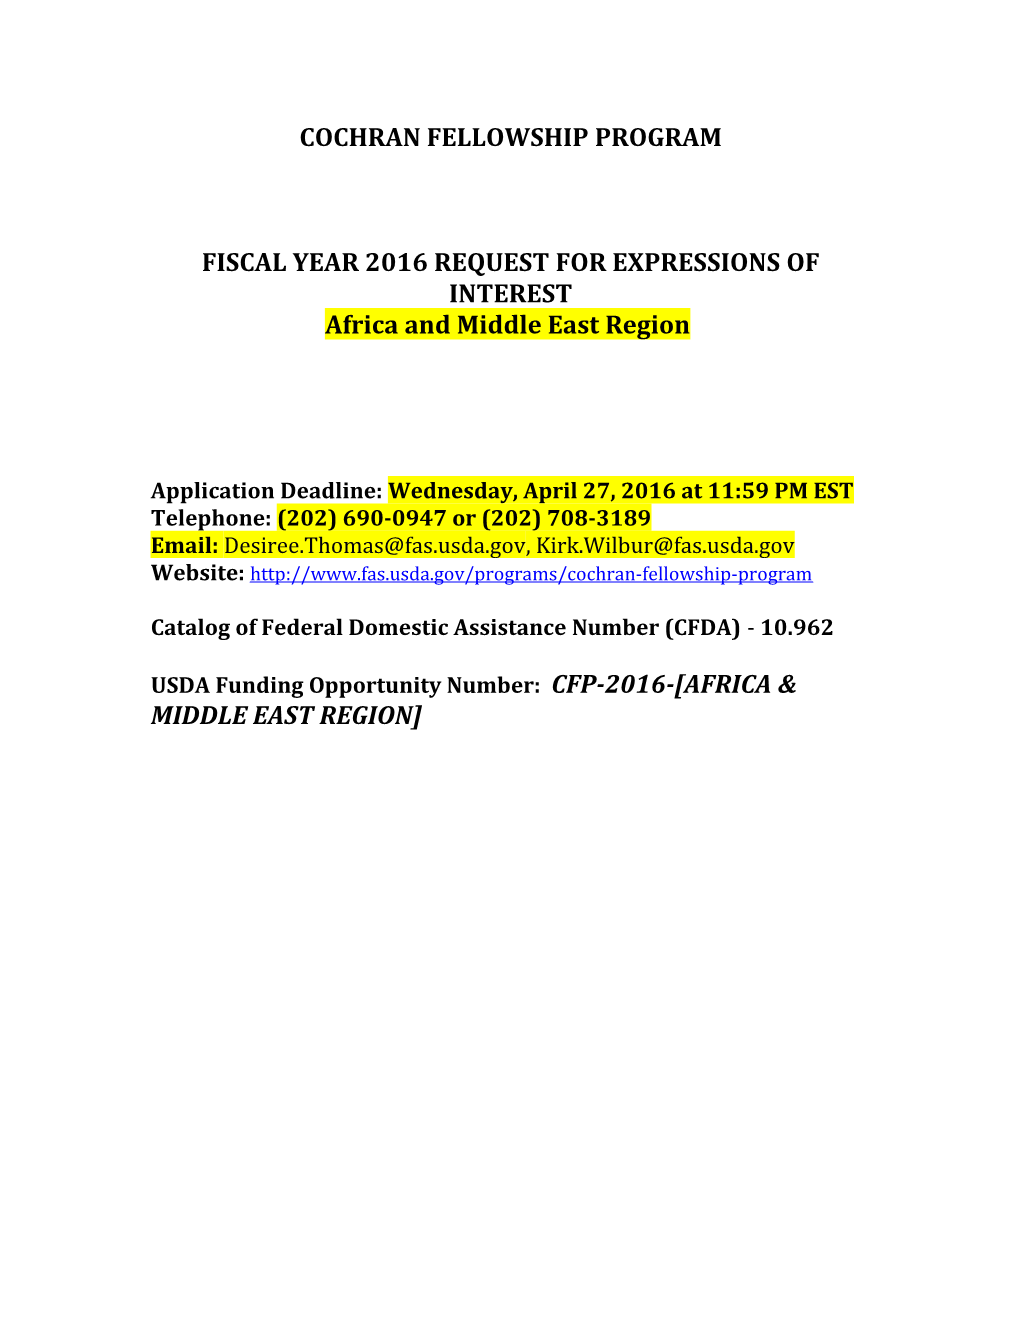 Fiscal Year 2016 Request for Expressions of Interest